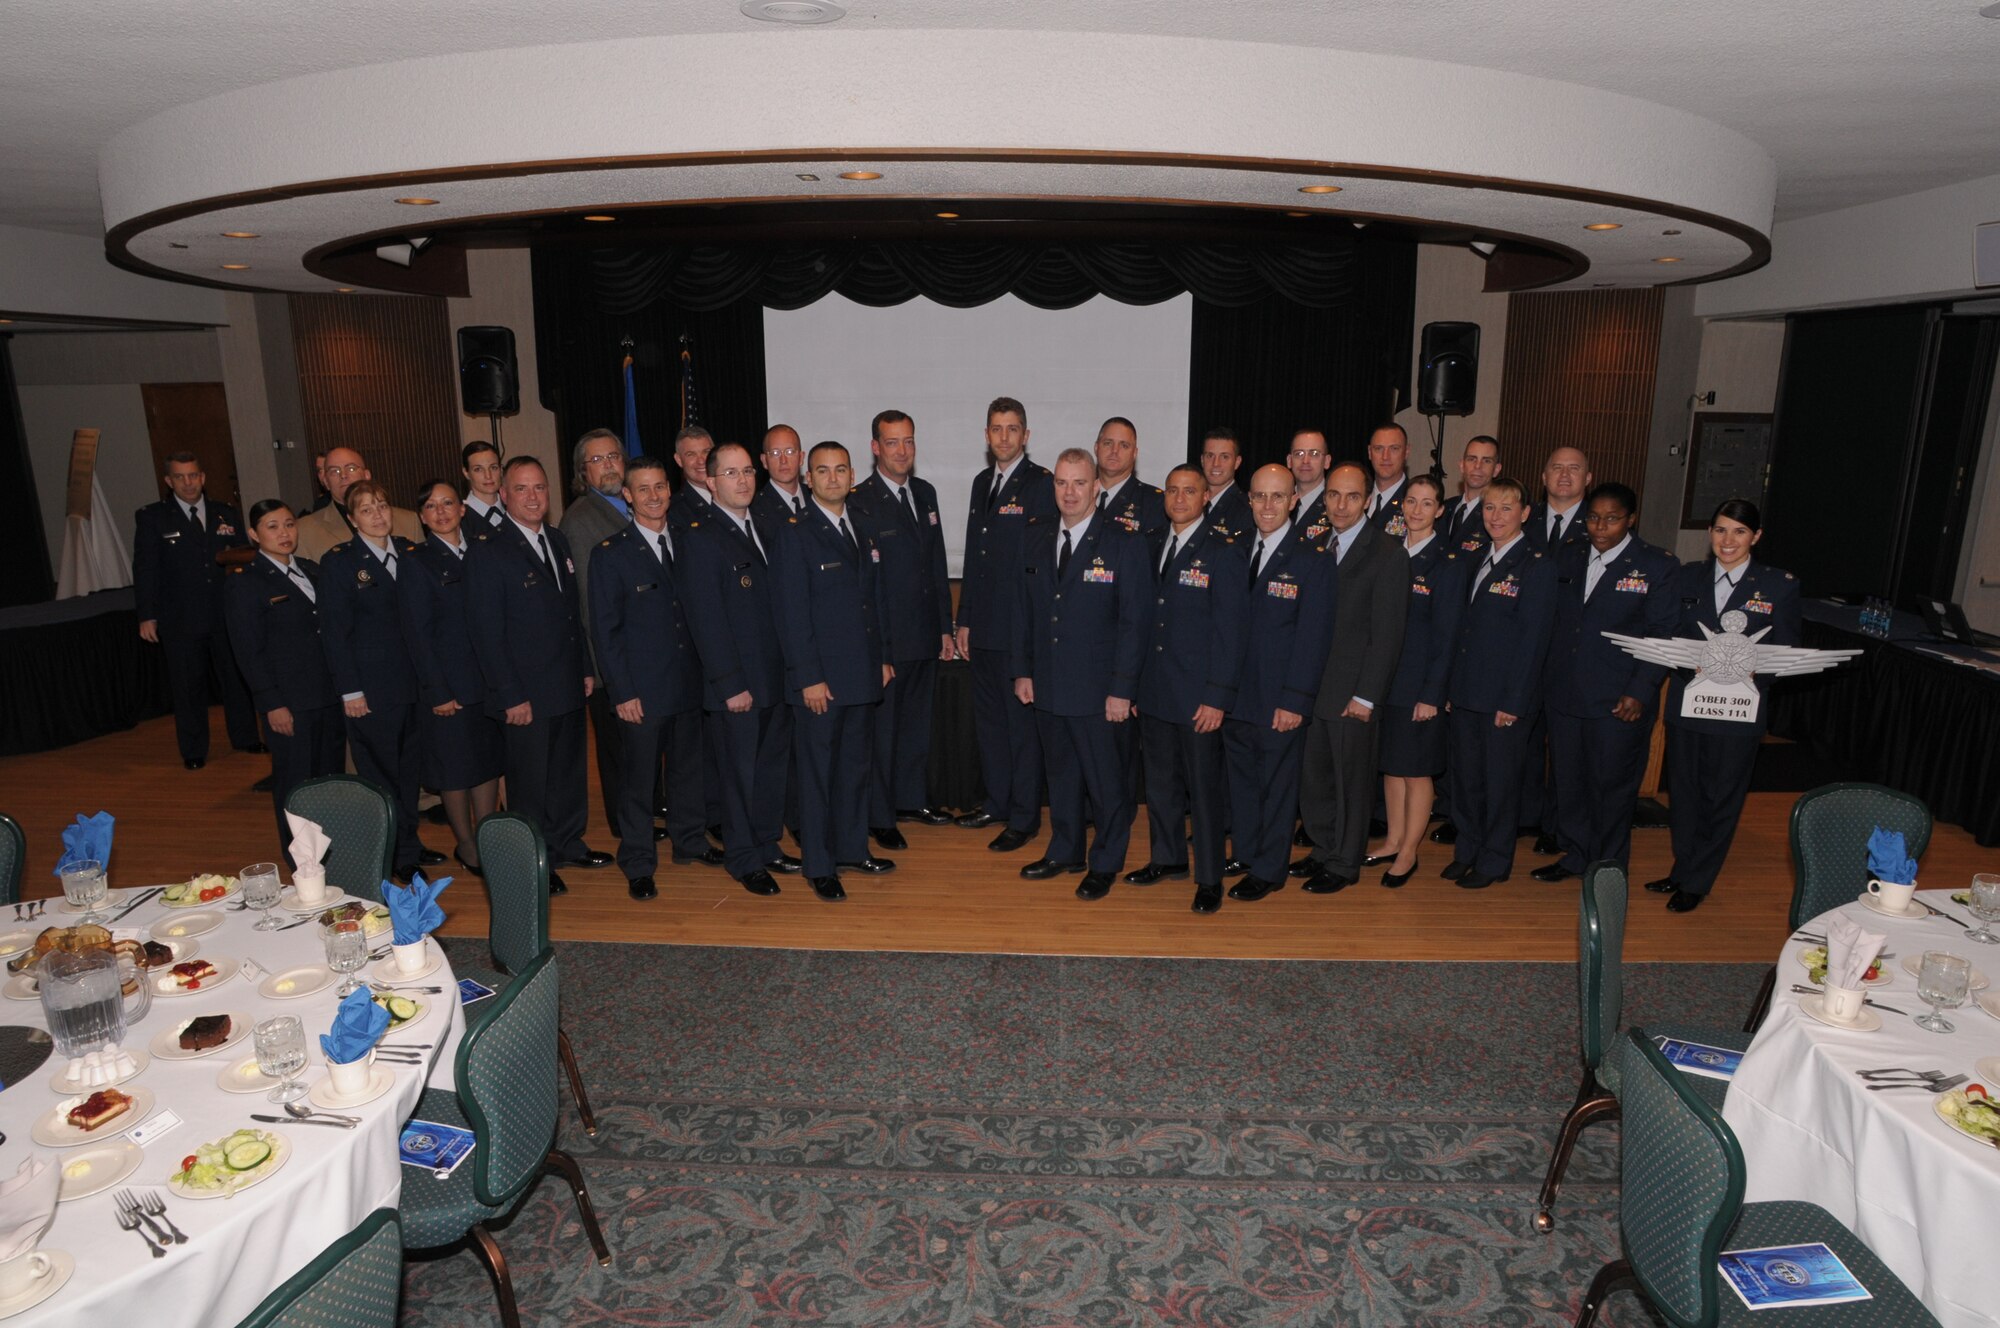 Graduates from the first Air Force Institute of Technology Cyber 300 class pause for a photo during graduation ceremonies, Oct. 28, 2010, at Wright-Patterson Air Force Base, Ohio.  (U.S. Air Force photo/Al Bright)